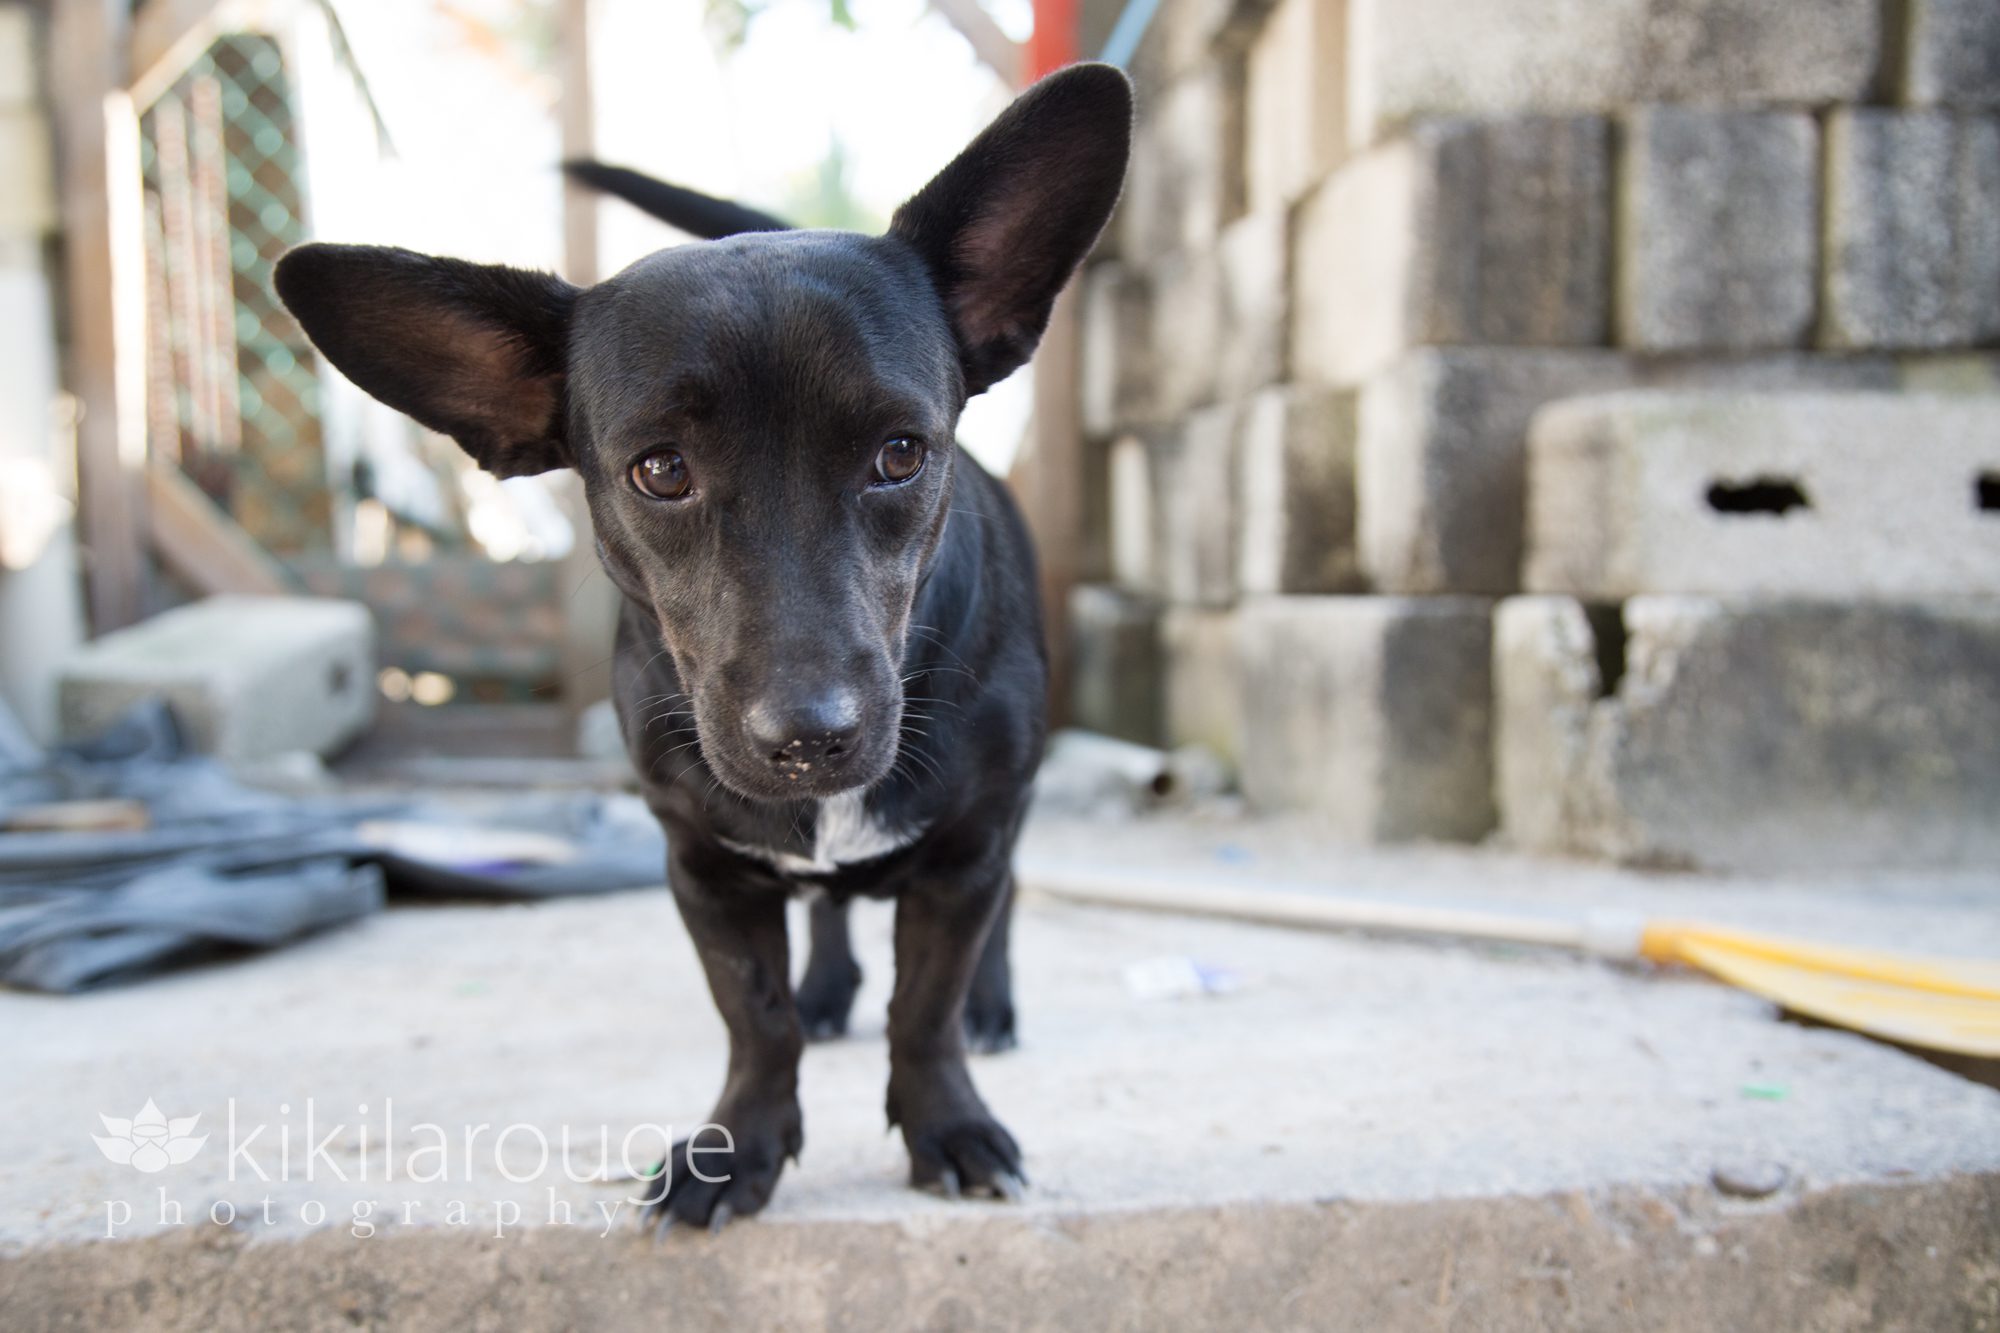 Little black rescue dog with big ears